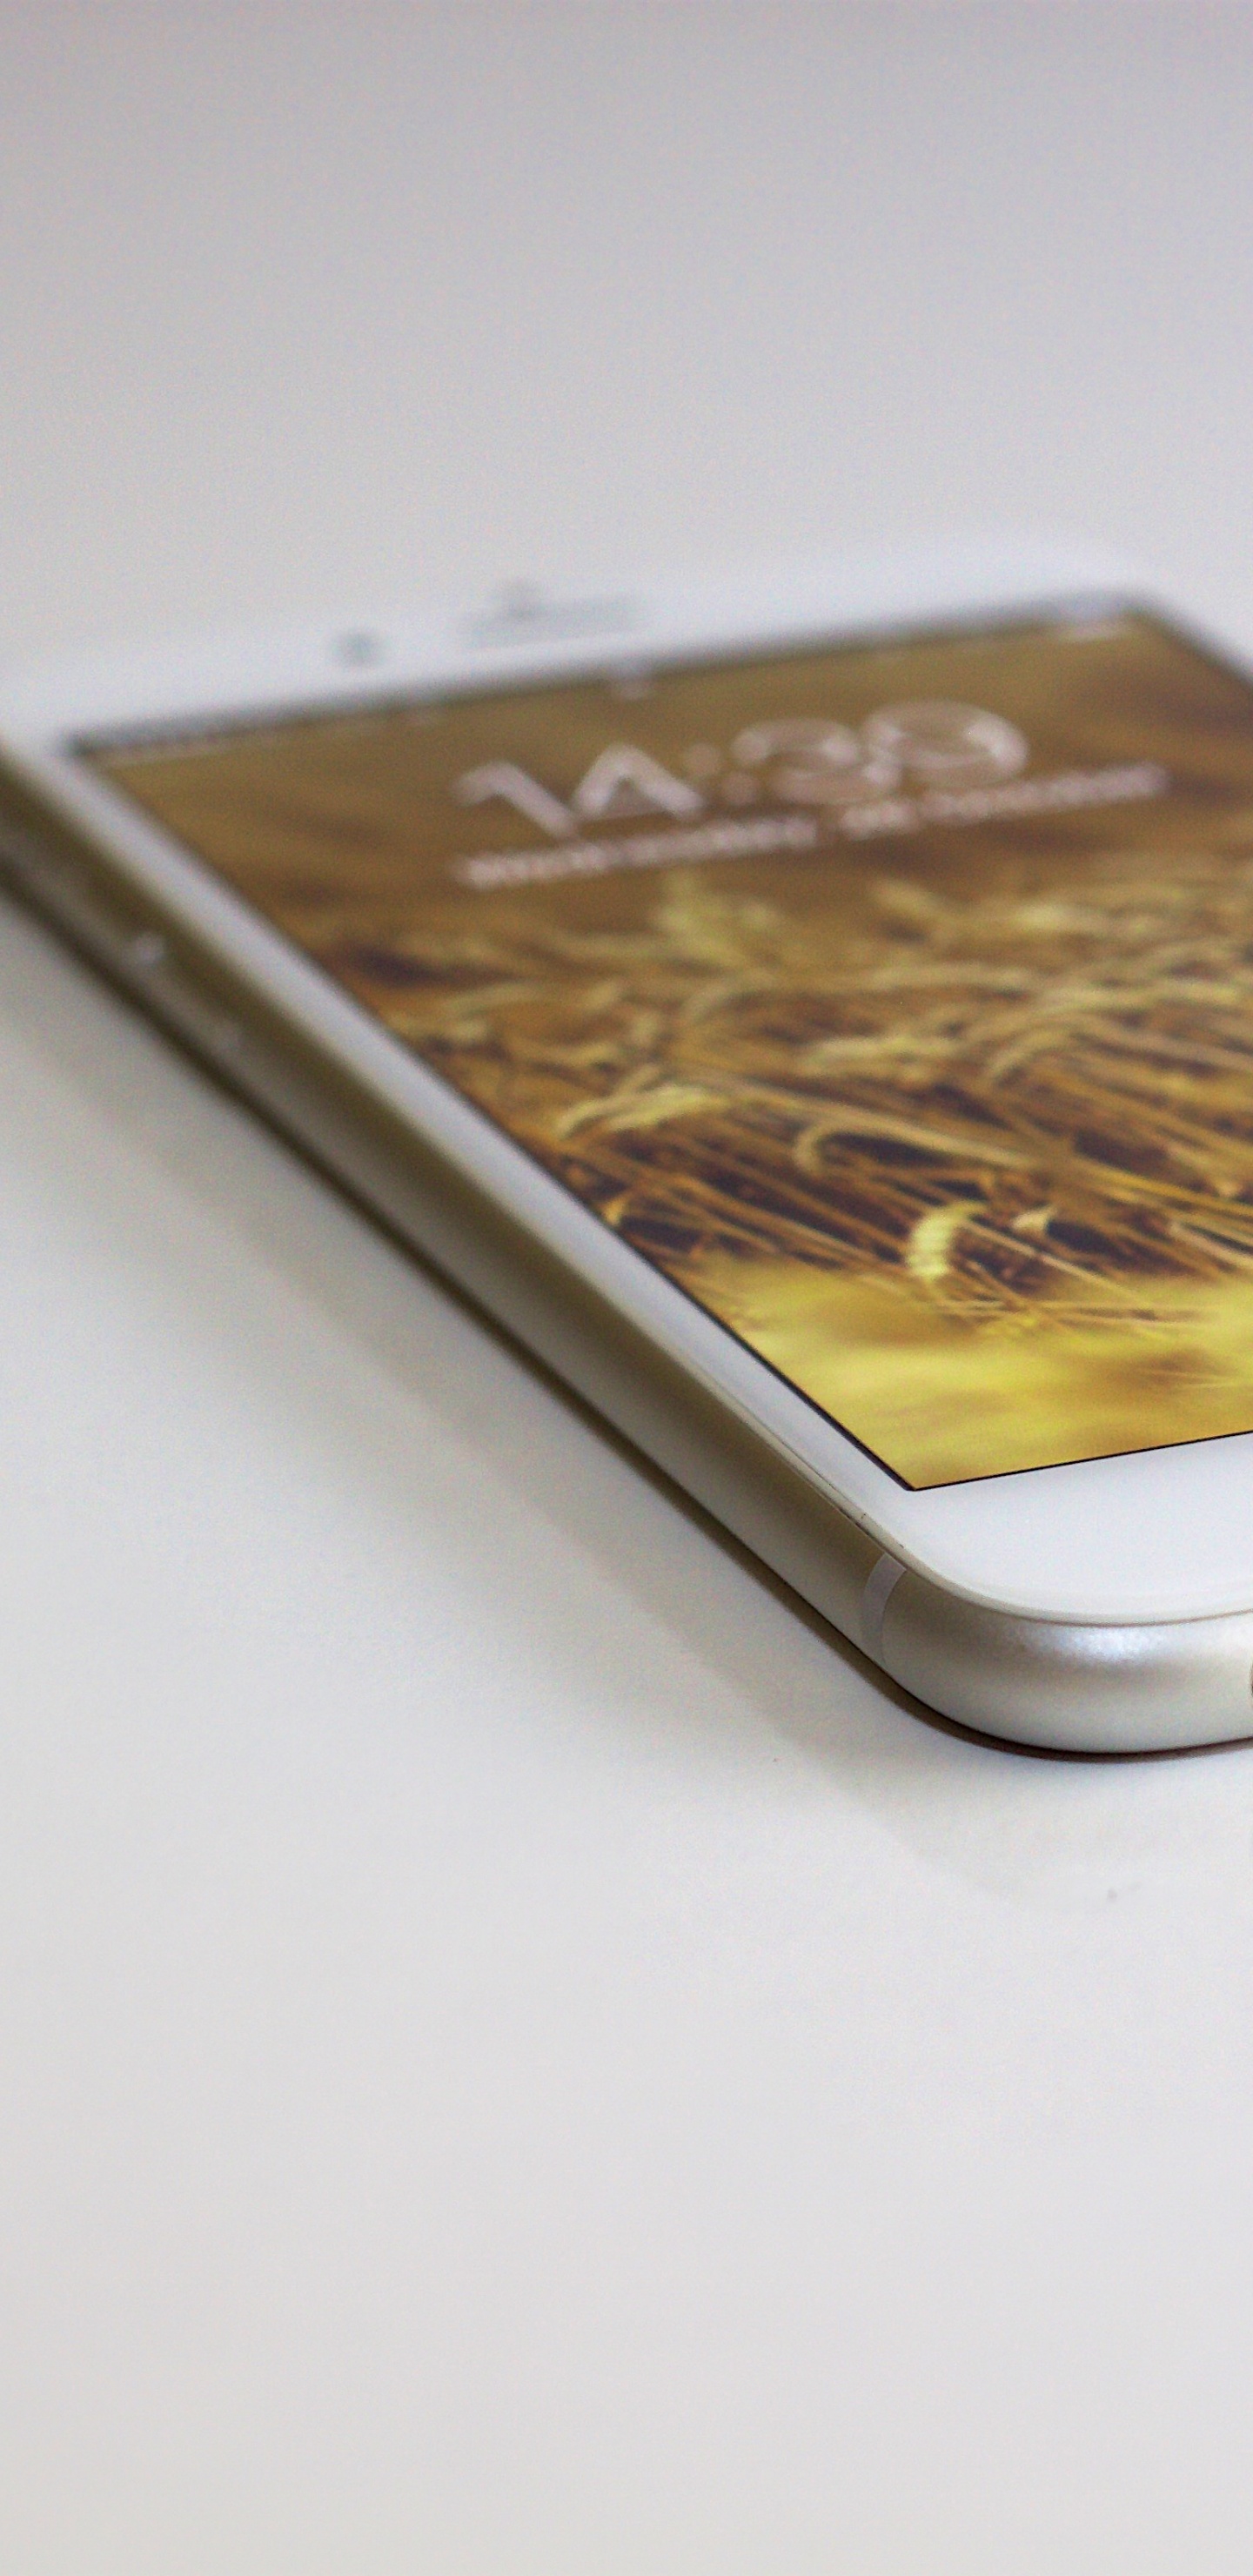 Gold Iphone 6 on White Table. Wallpaper in 1440x2960 Resolution